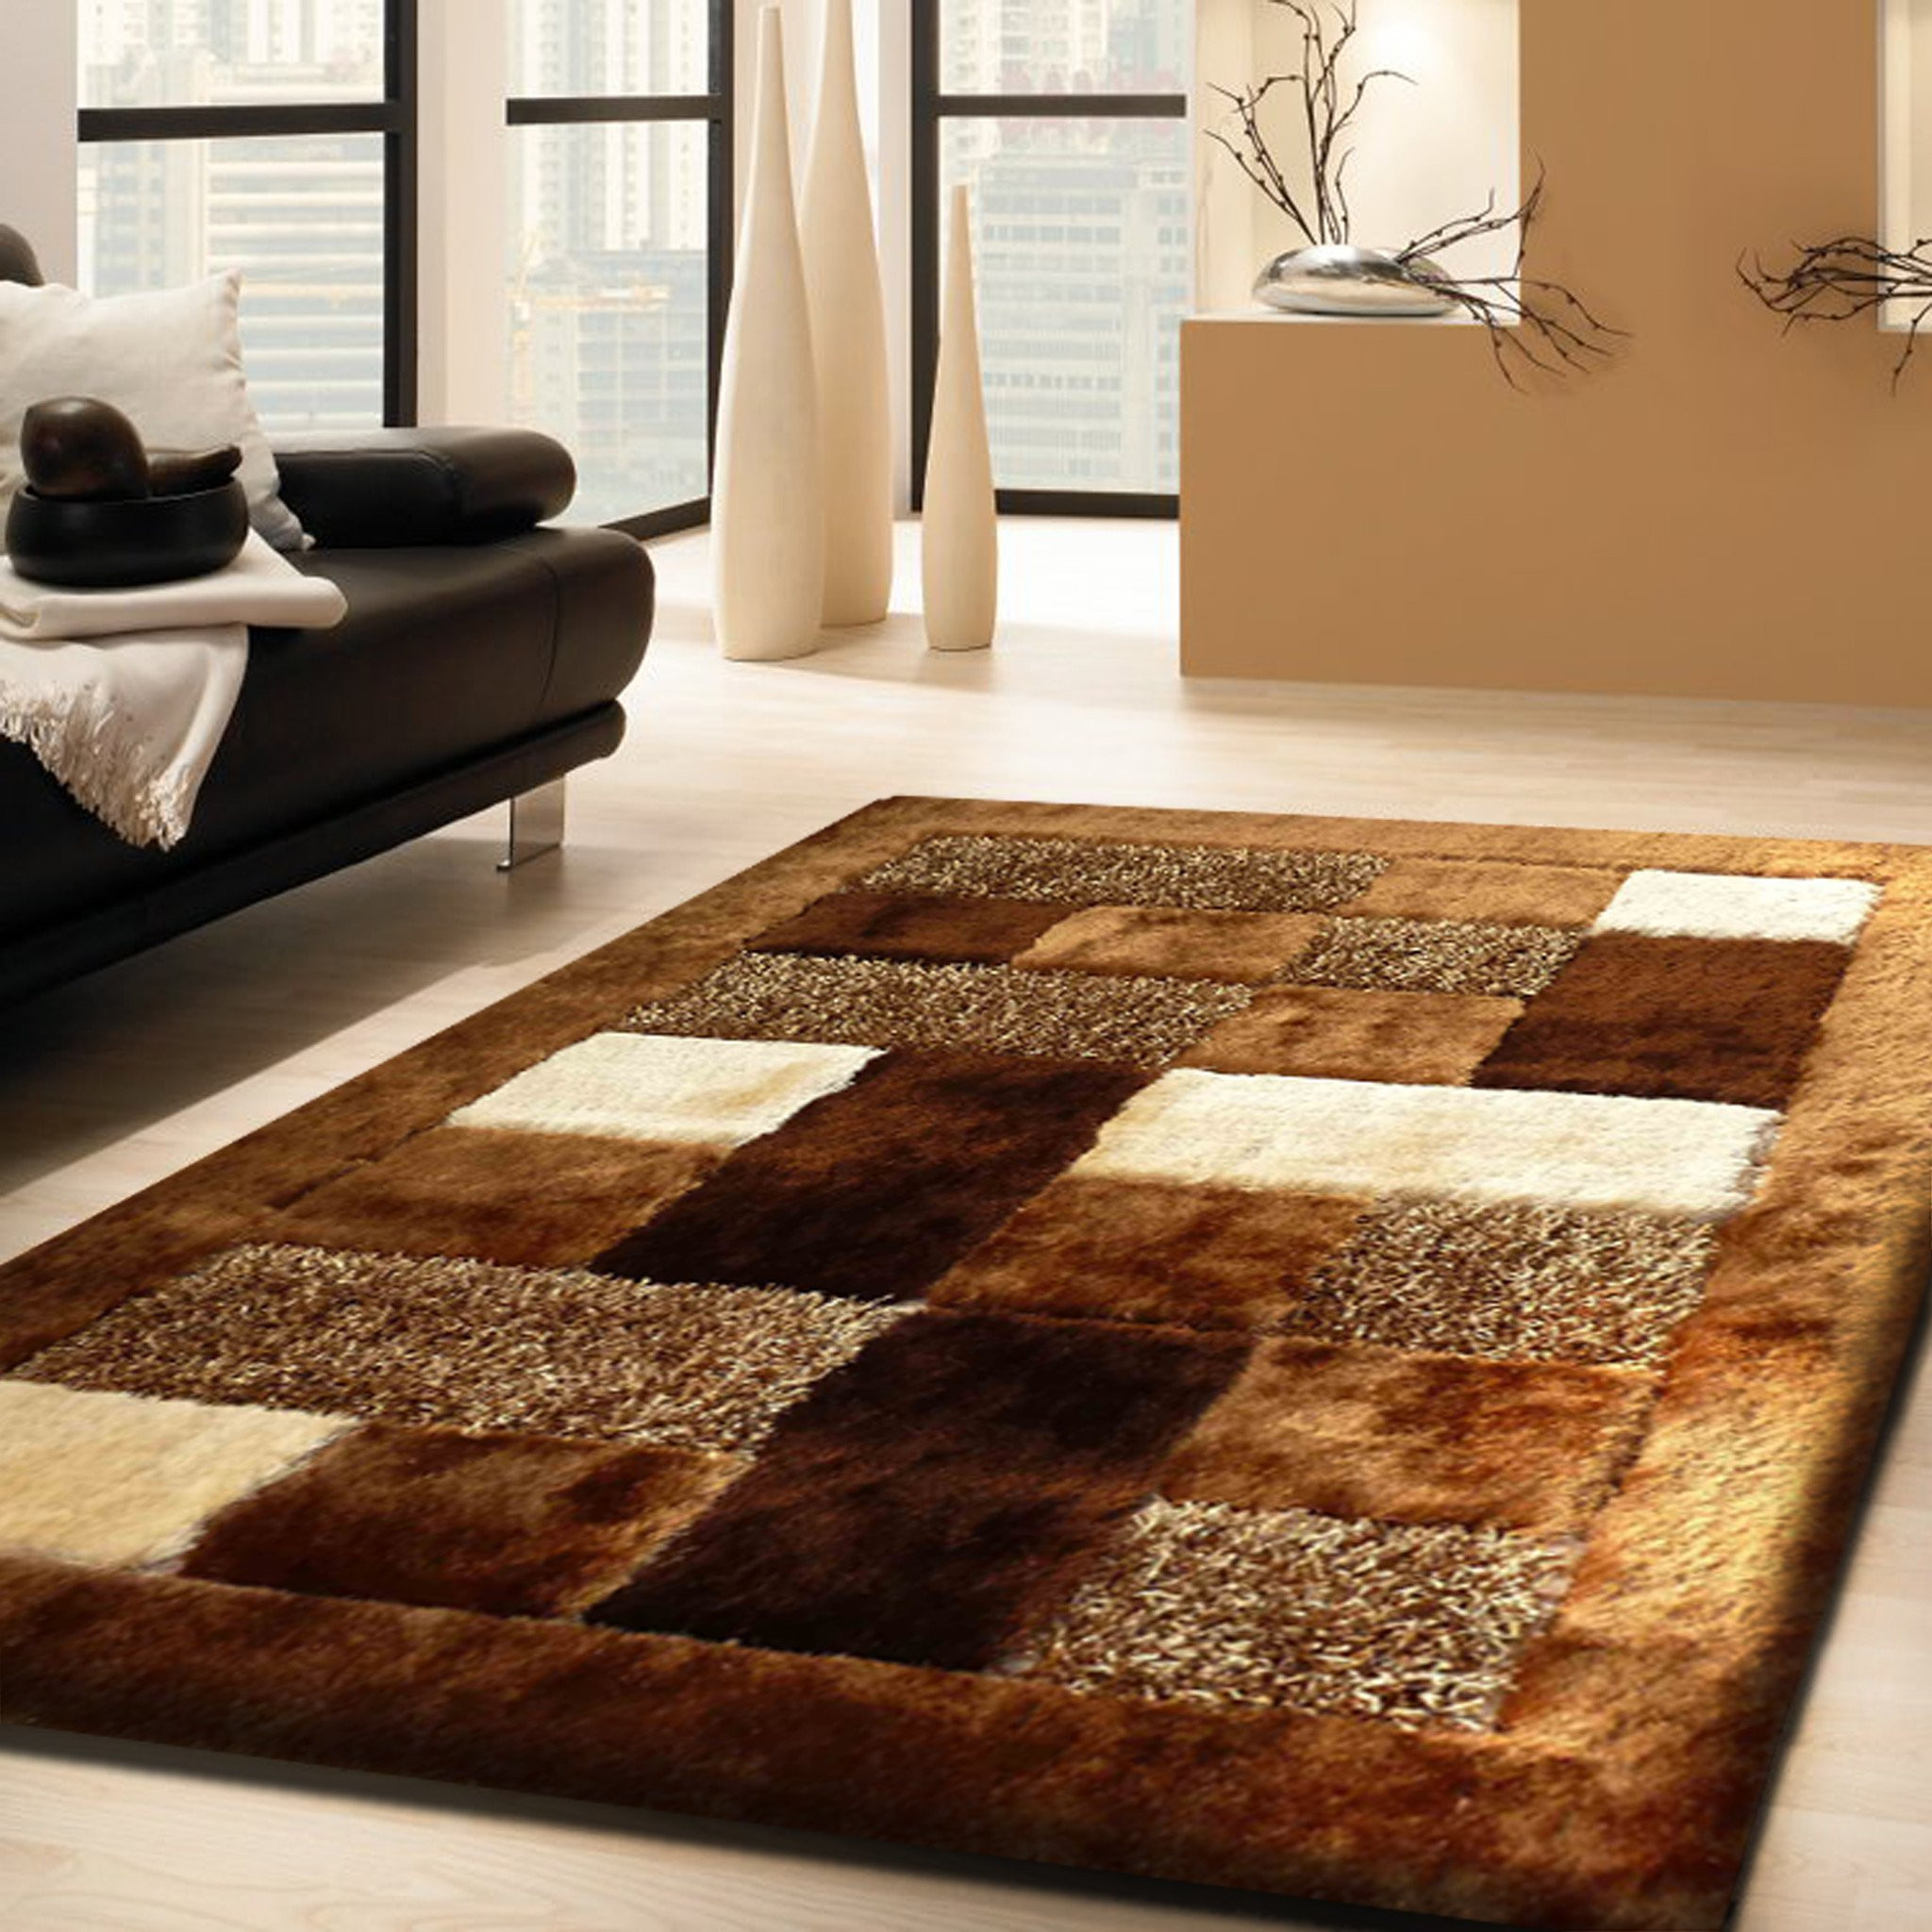 Brown Living Room Rugs
 Brown Shaggy Hand tufted Area Rug By Rug Addiction